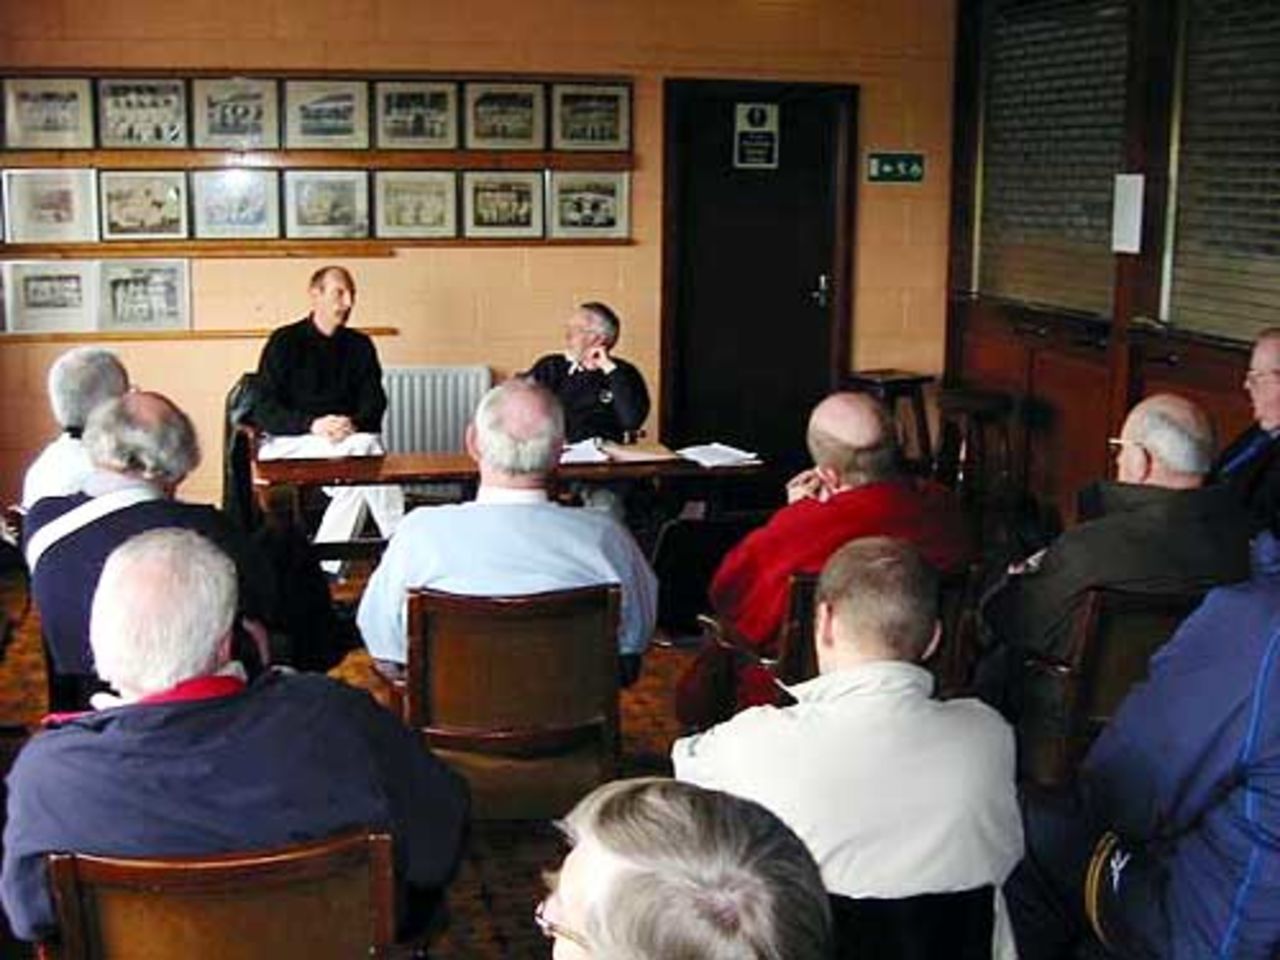 Neil Mallender shares the benefit of his experience at Clontarf CC